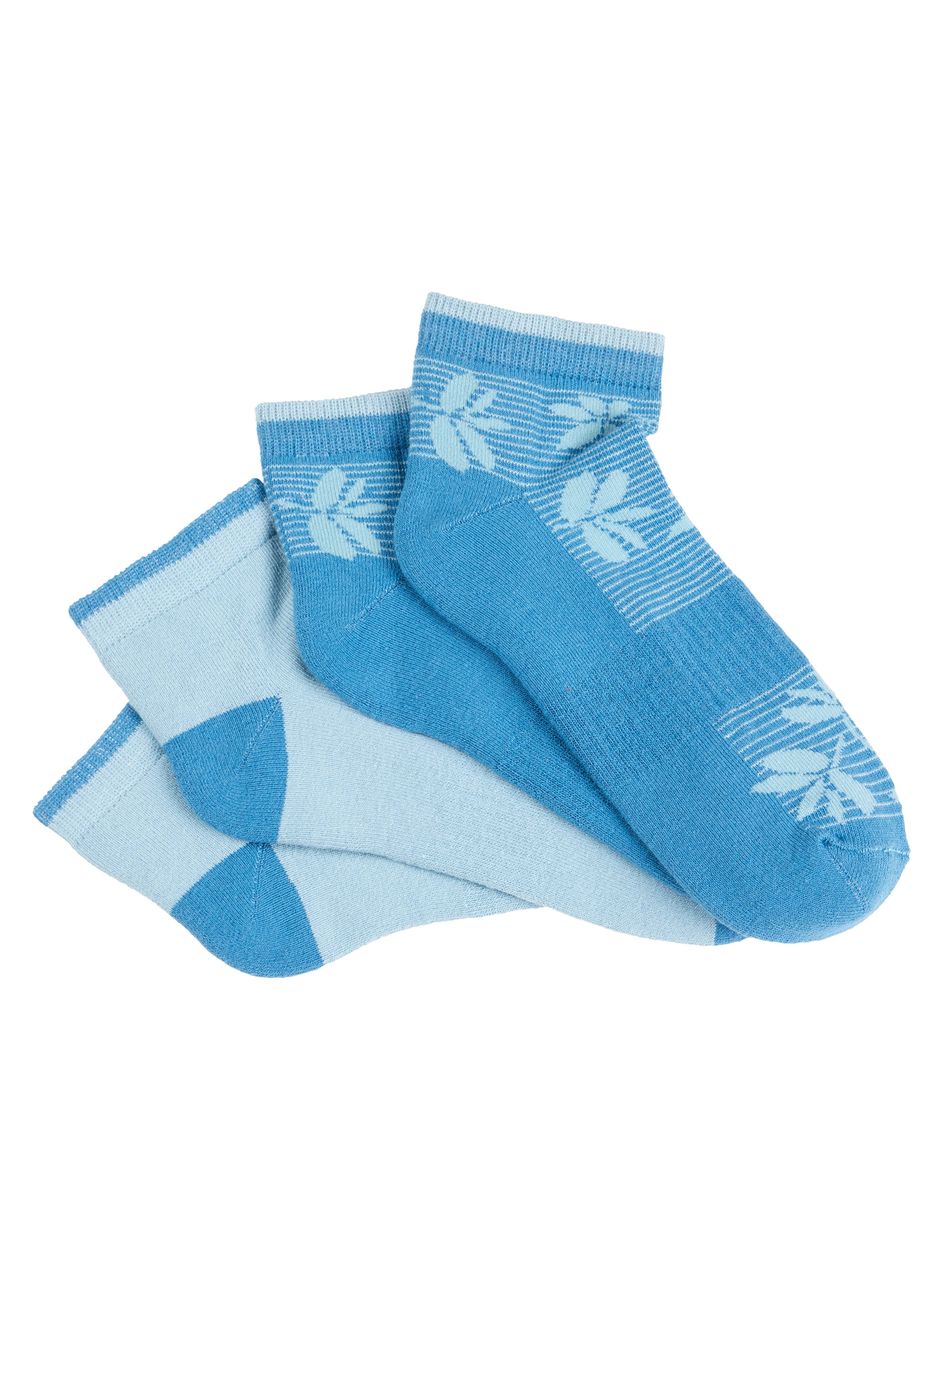 Athea Bamboo Trainer Socks 2 Pack Provincial Blue